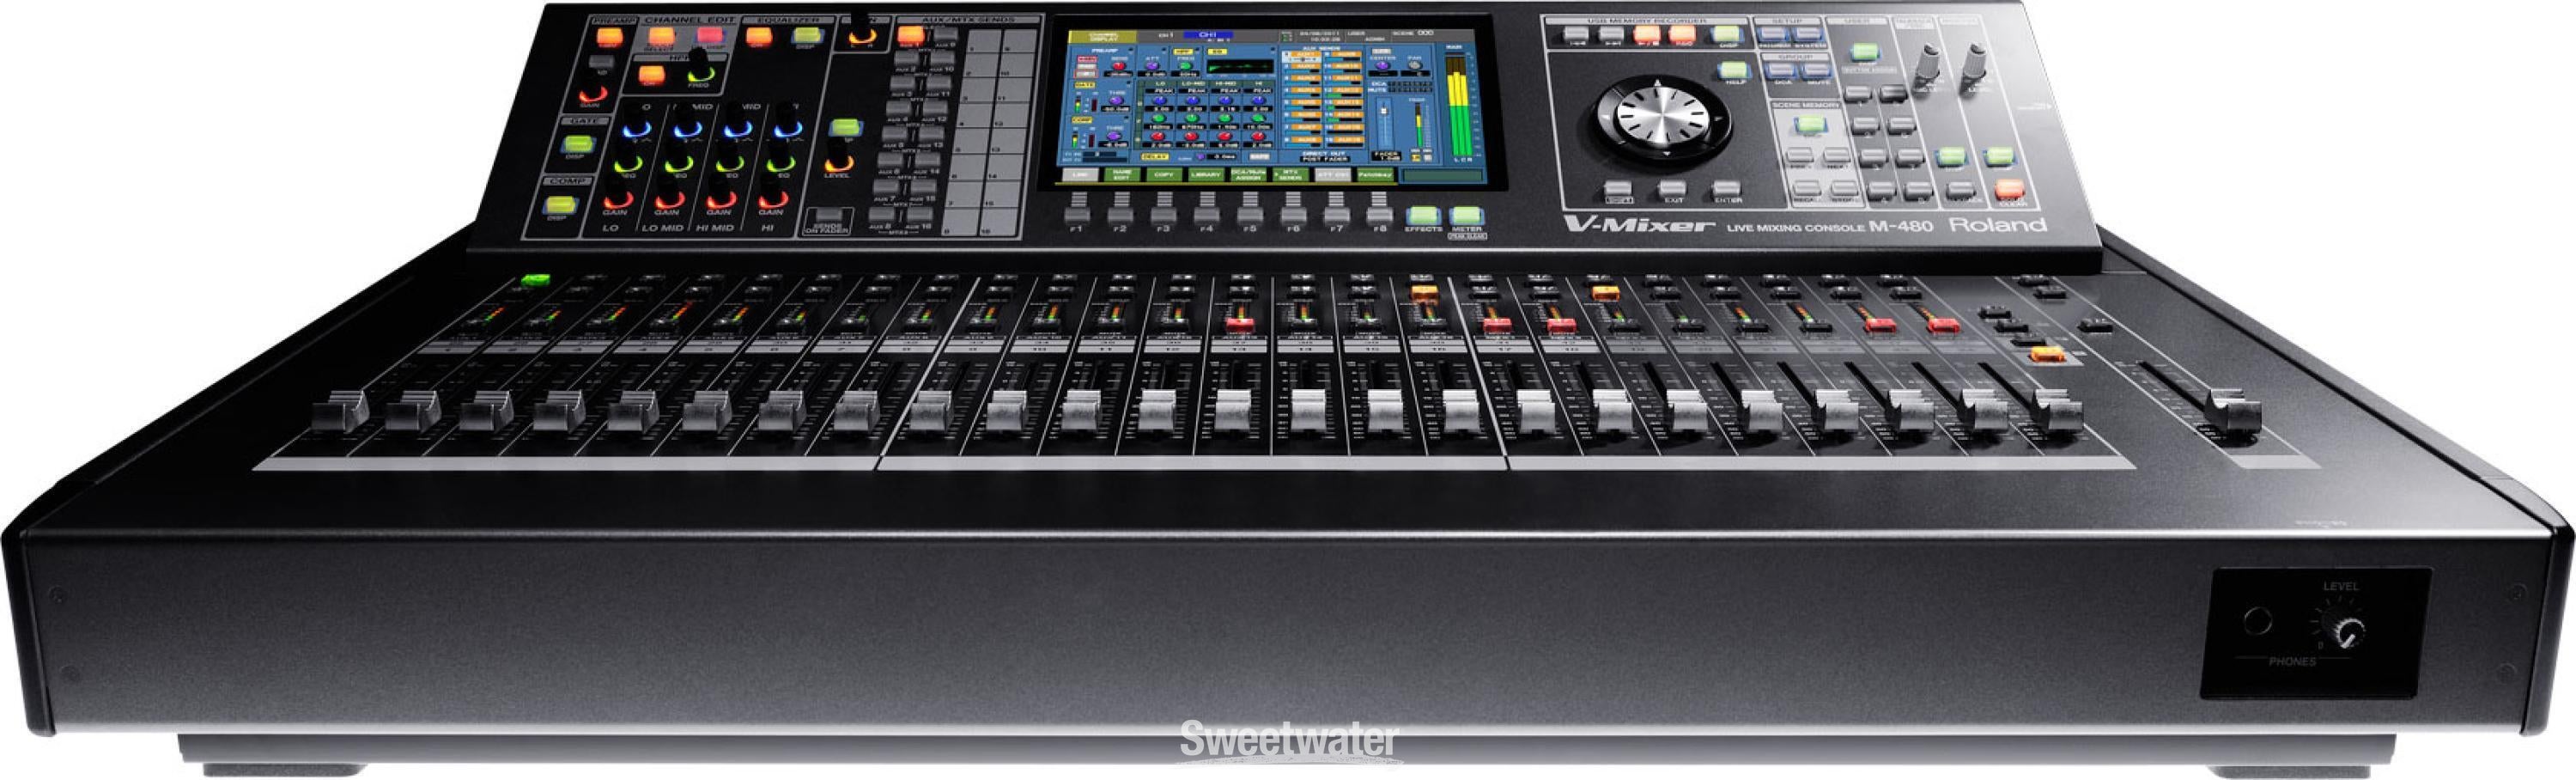 Roland M-480 V-Mixer and 58 x 26 Snake Bundle | Sweetwater